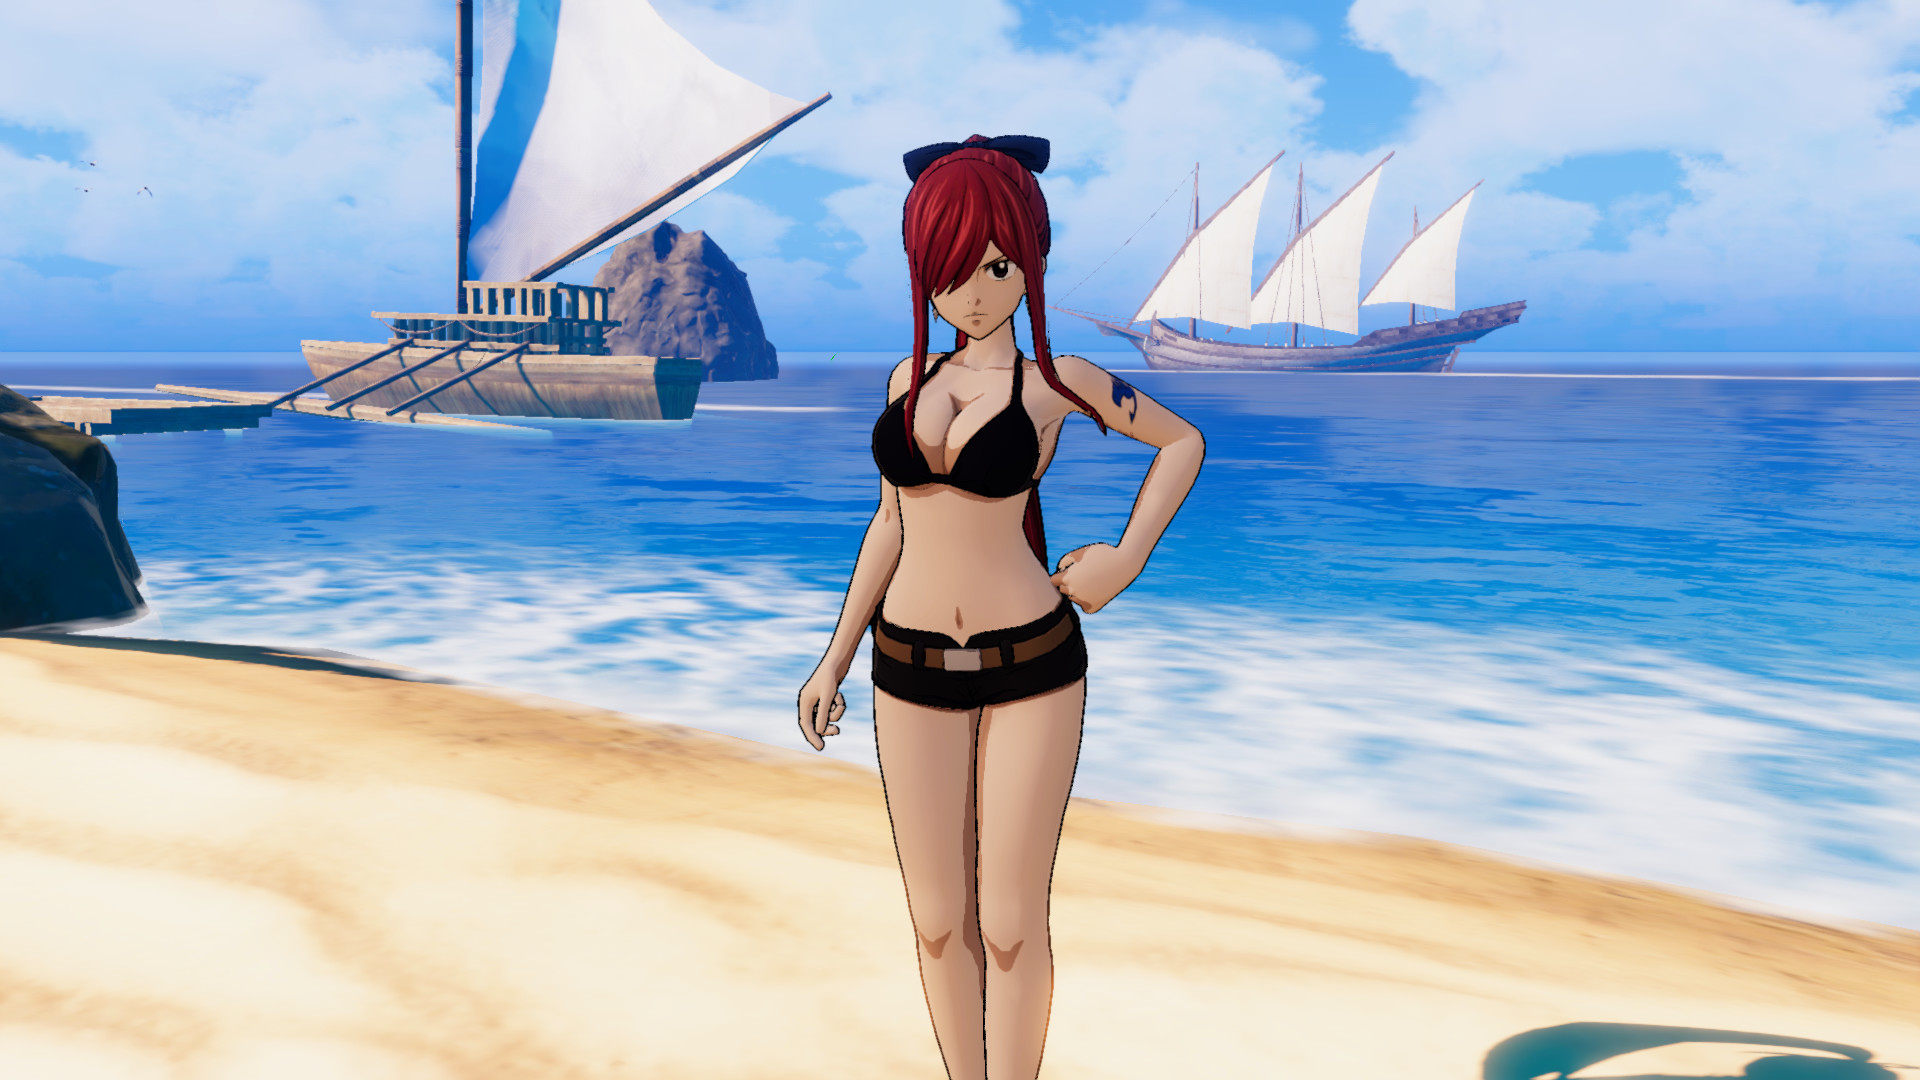 FAIRY TAIL: Erza's Costume "Special Swimsuit" screenshot